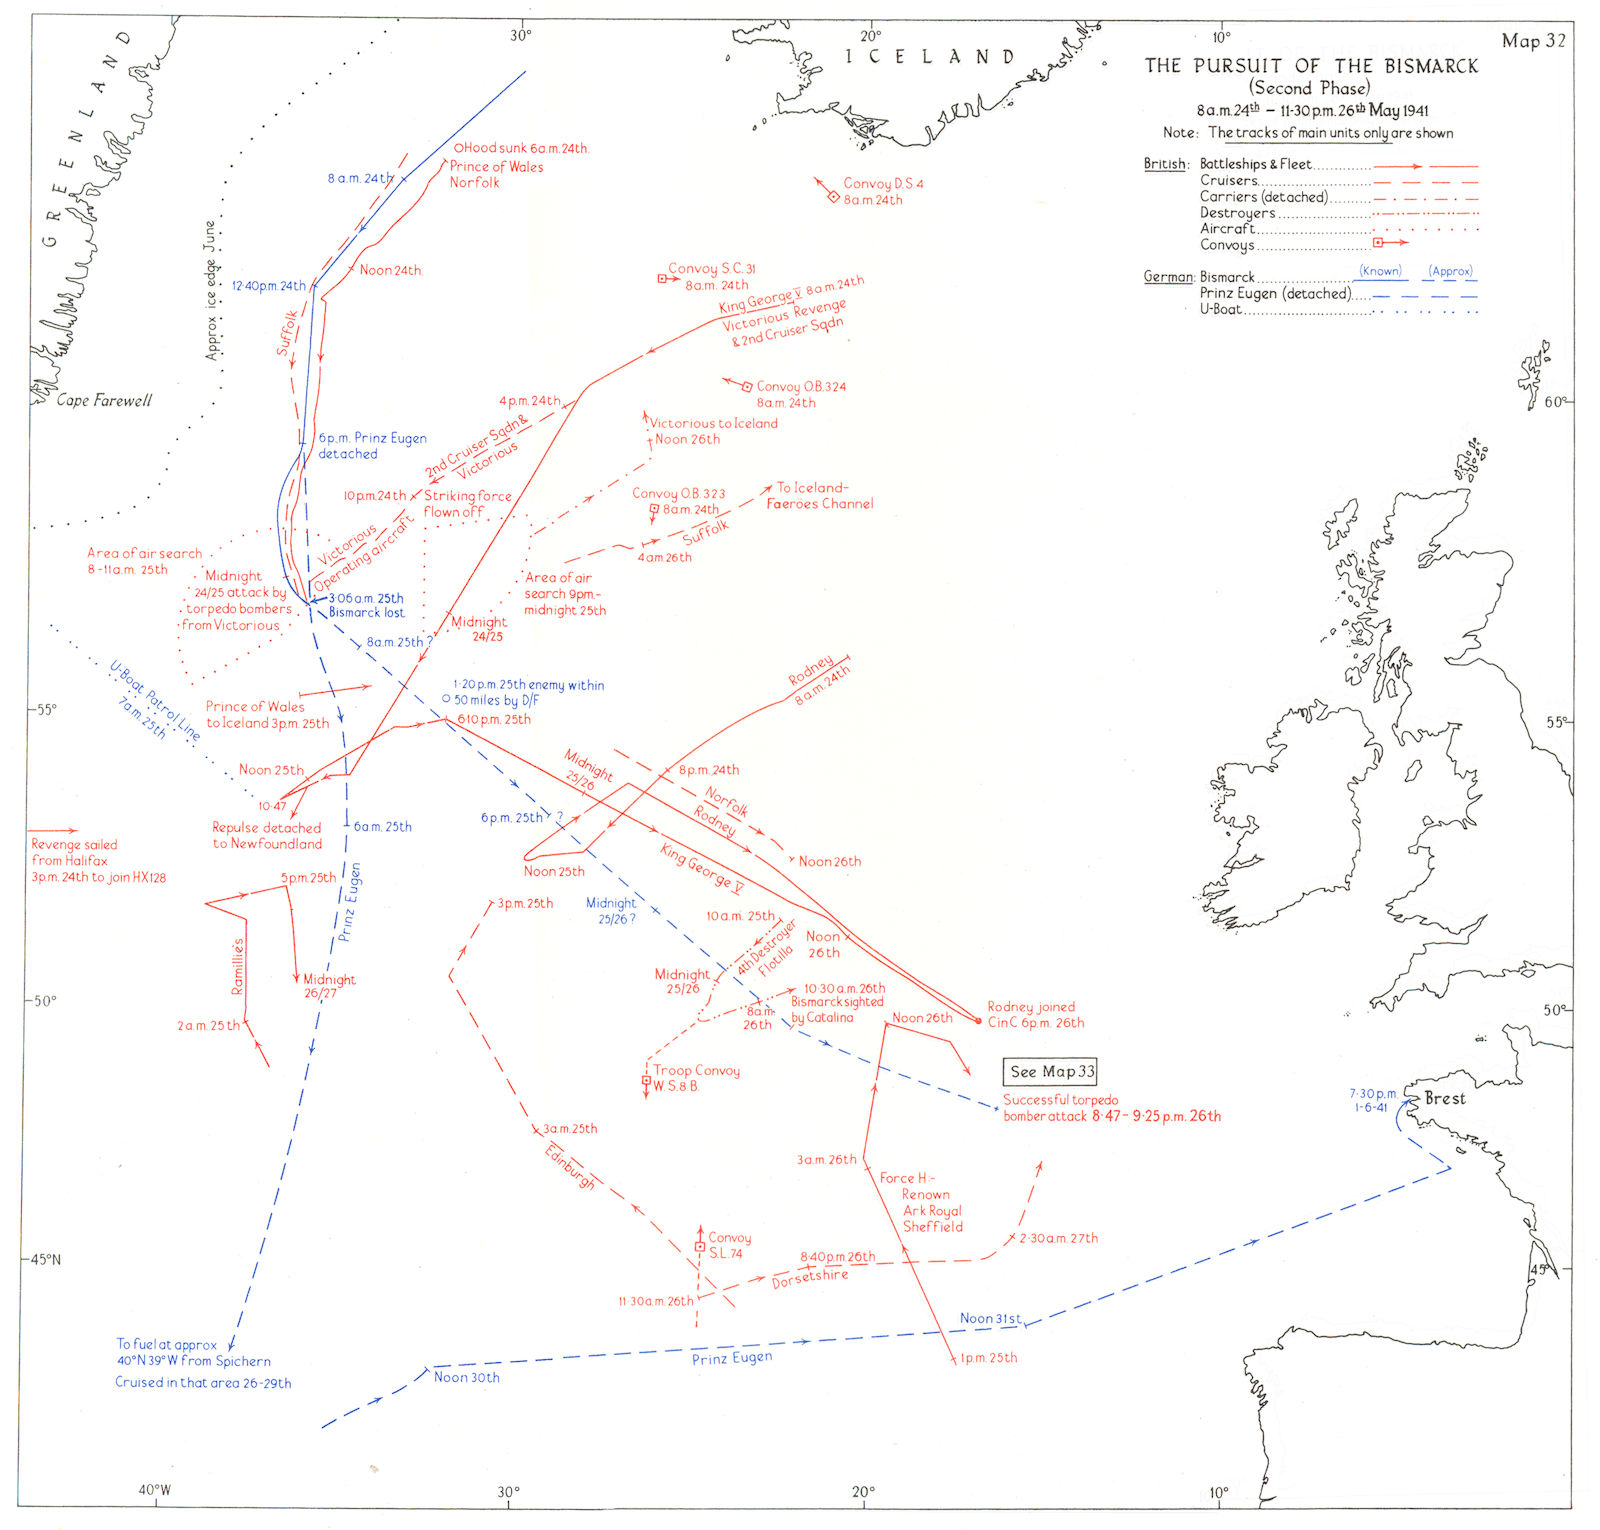 ATLANTIC. Pursuit of Bismarck 8 am 24th-11 30 pm 26th May 1941 1954 old map